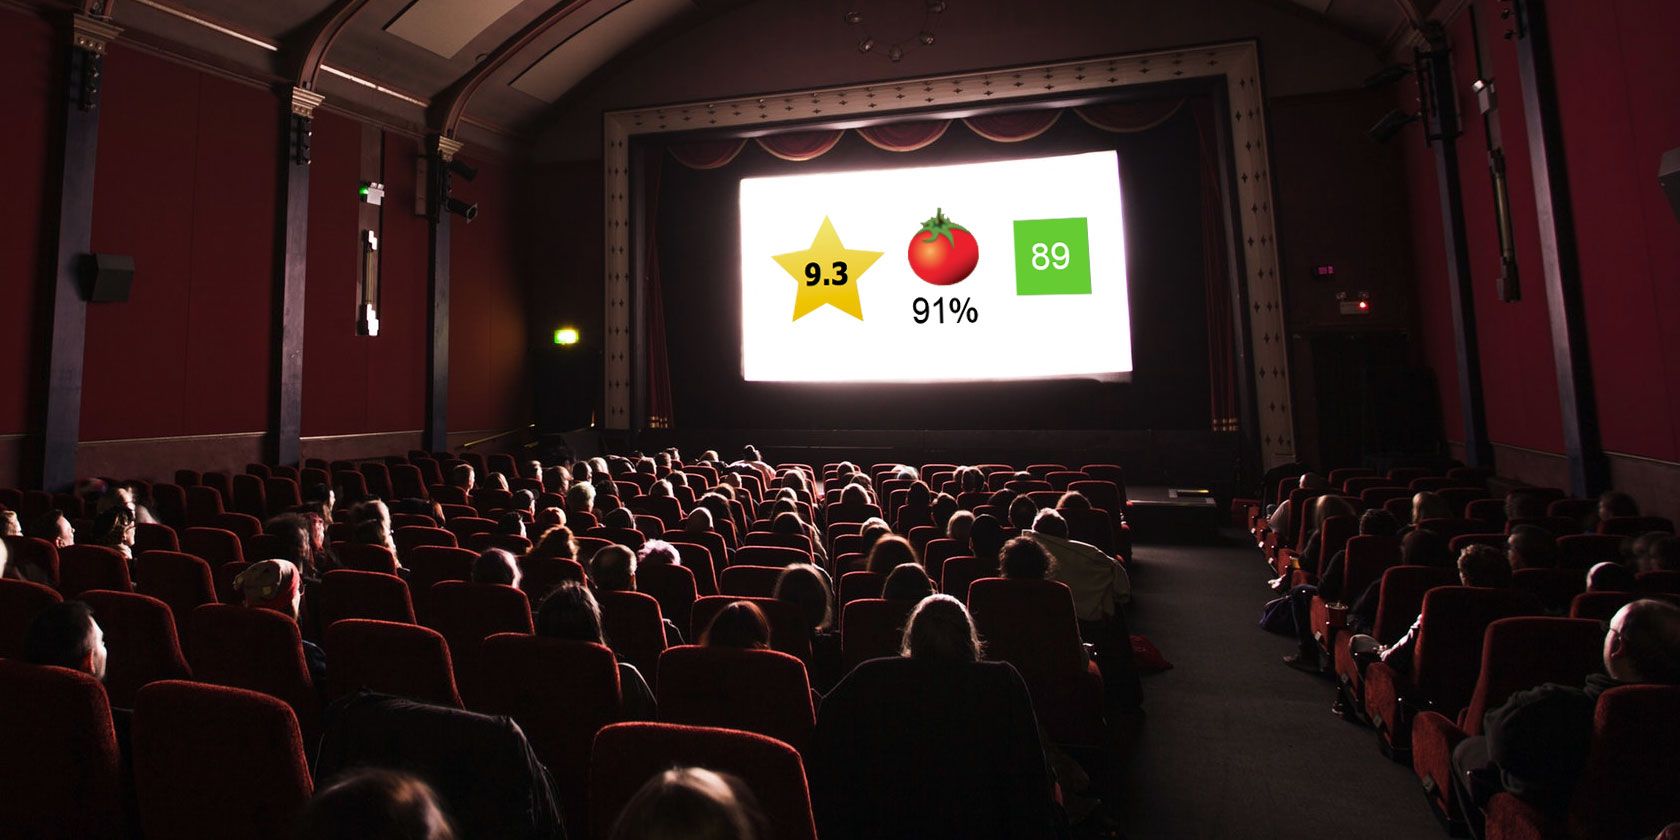 IMDb vs. Rotten Tomatoes vs. Metacritic: Which Movie Ratings Site Is Best?